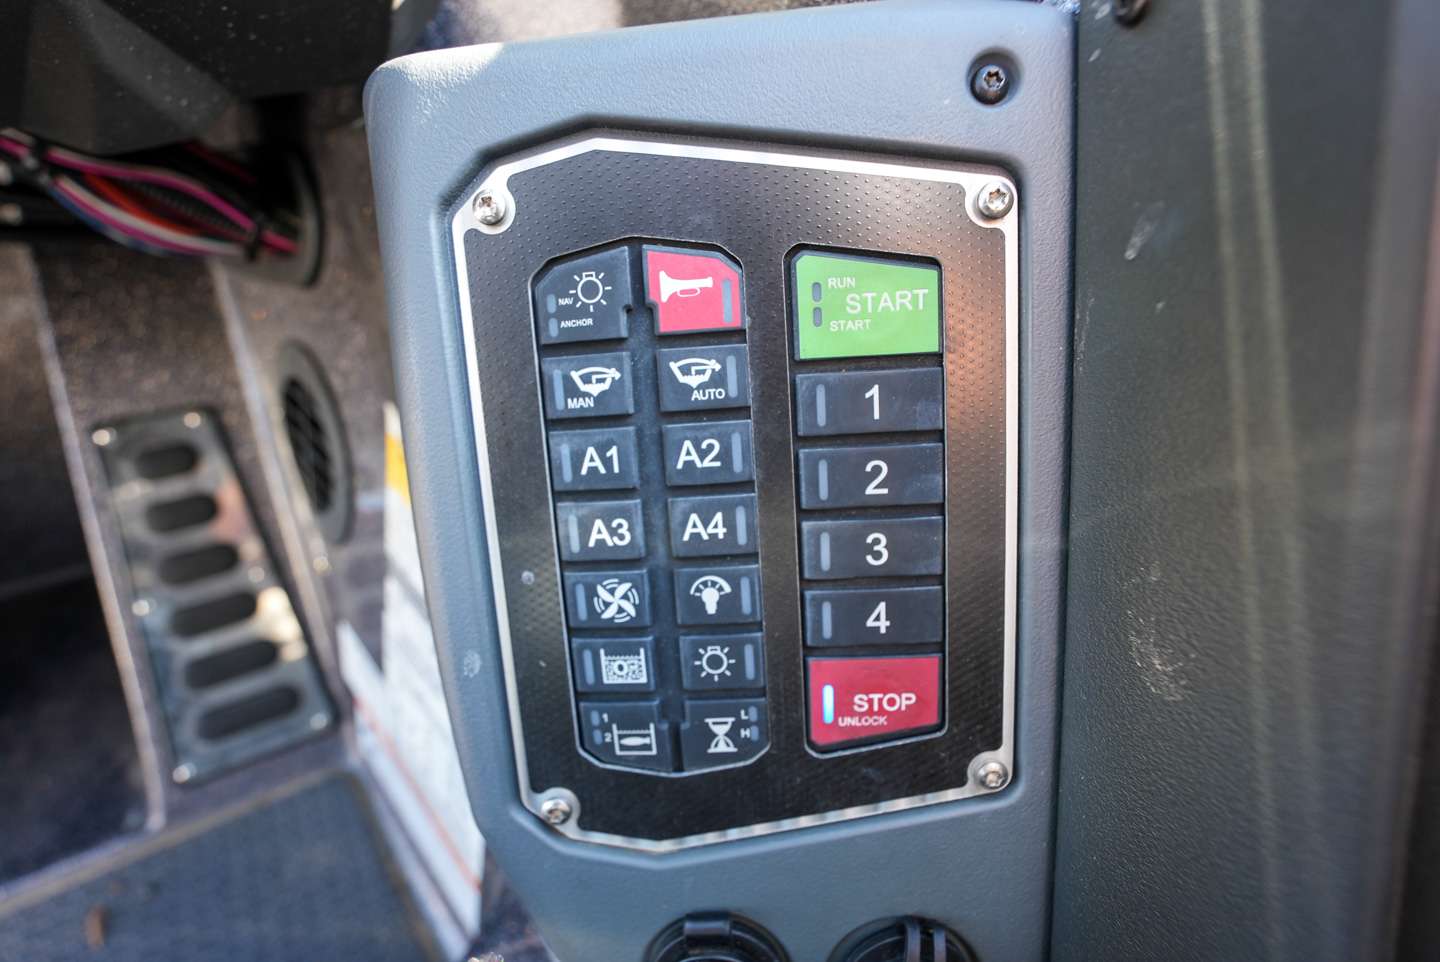 The standard keypad that comes on a Ranger boat. 